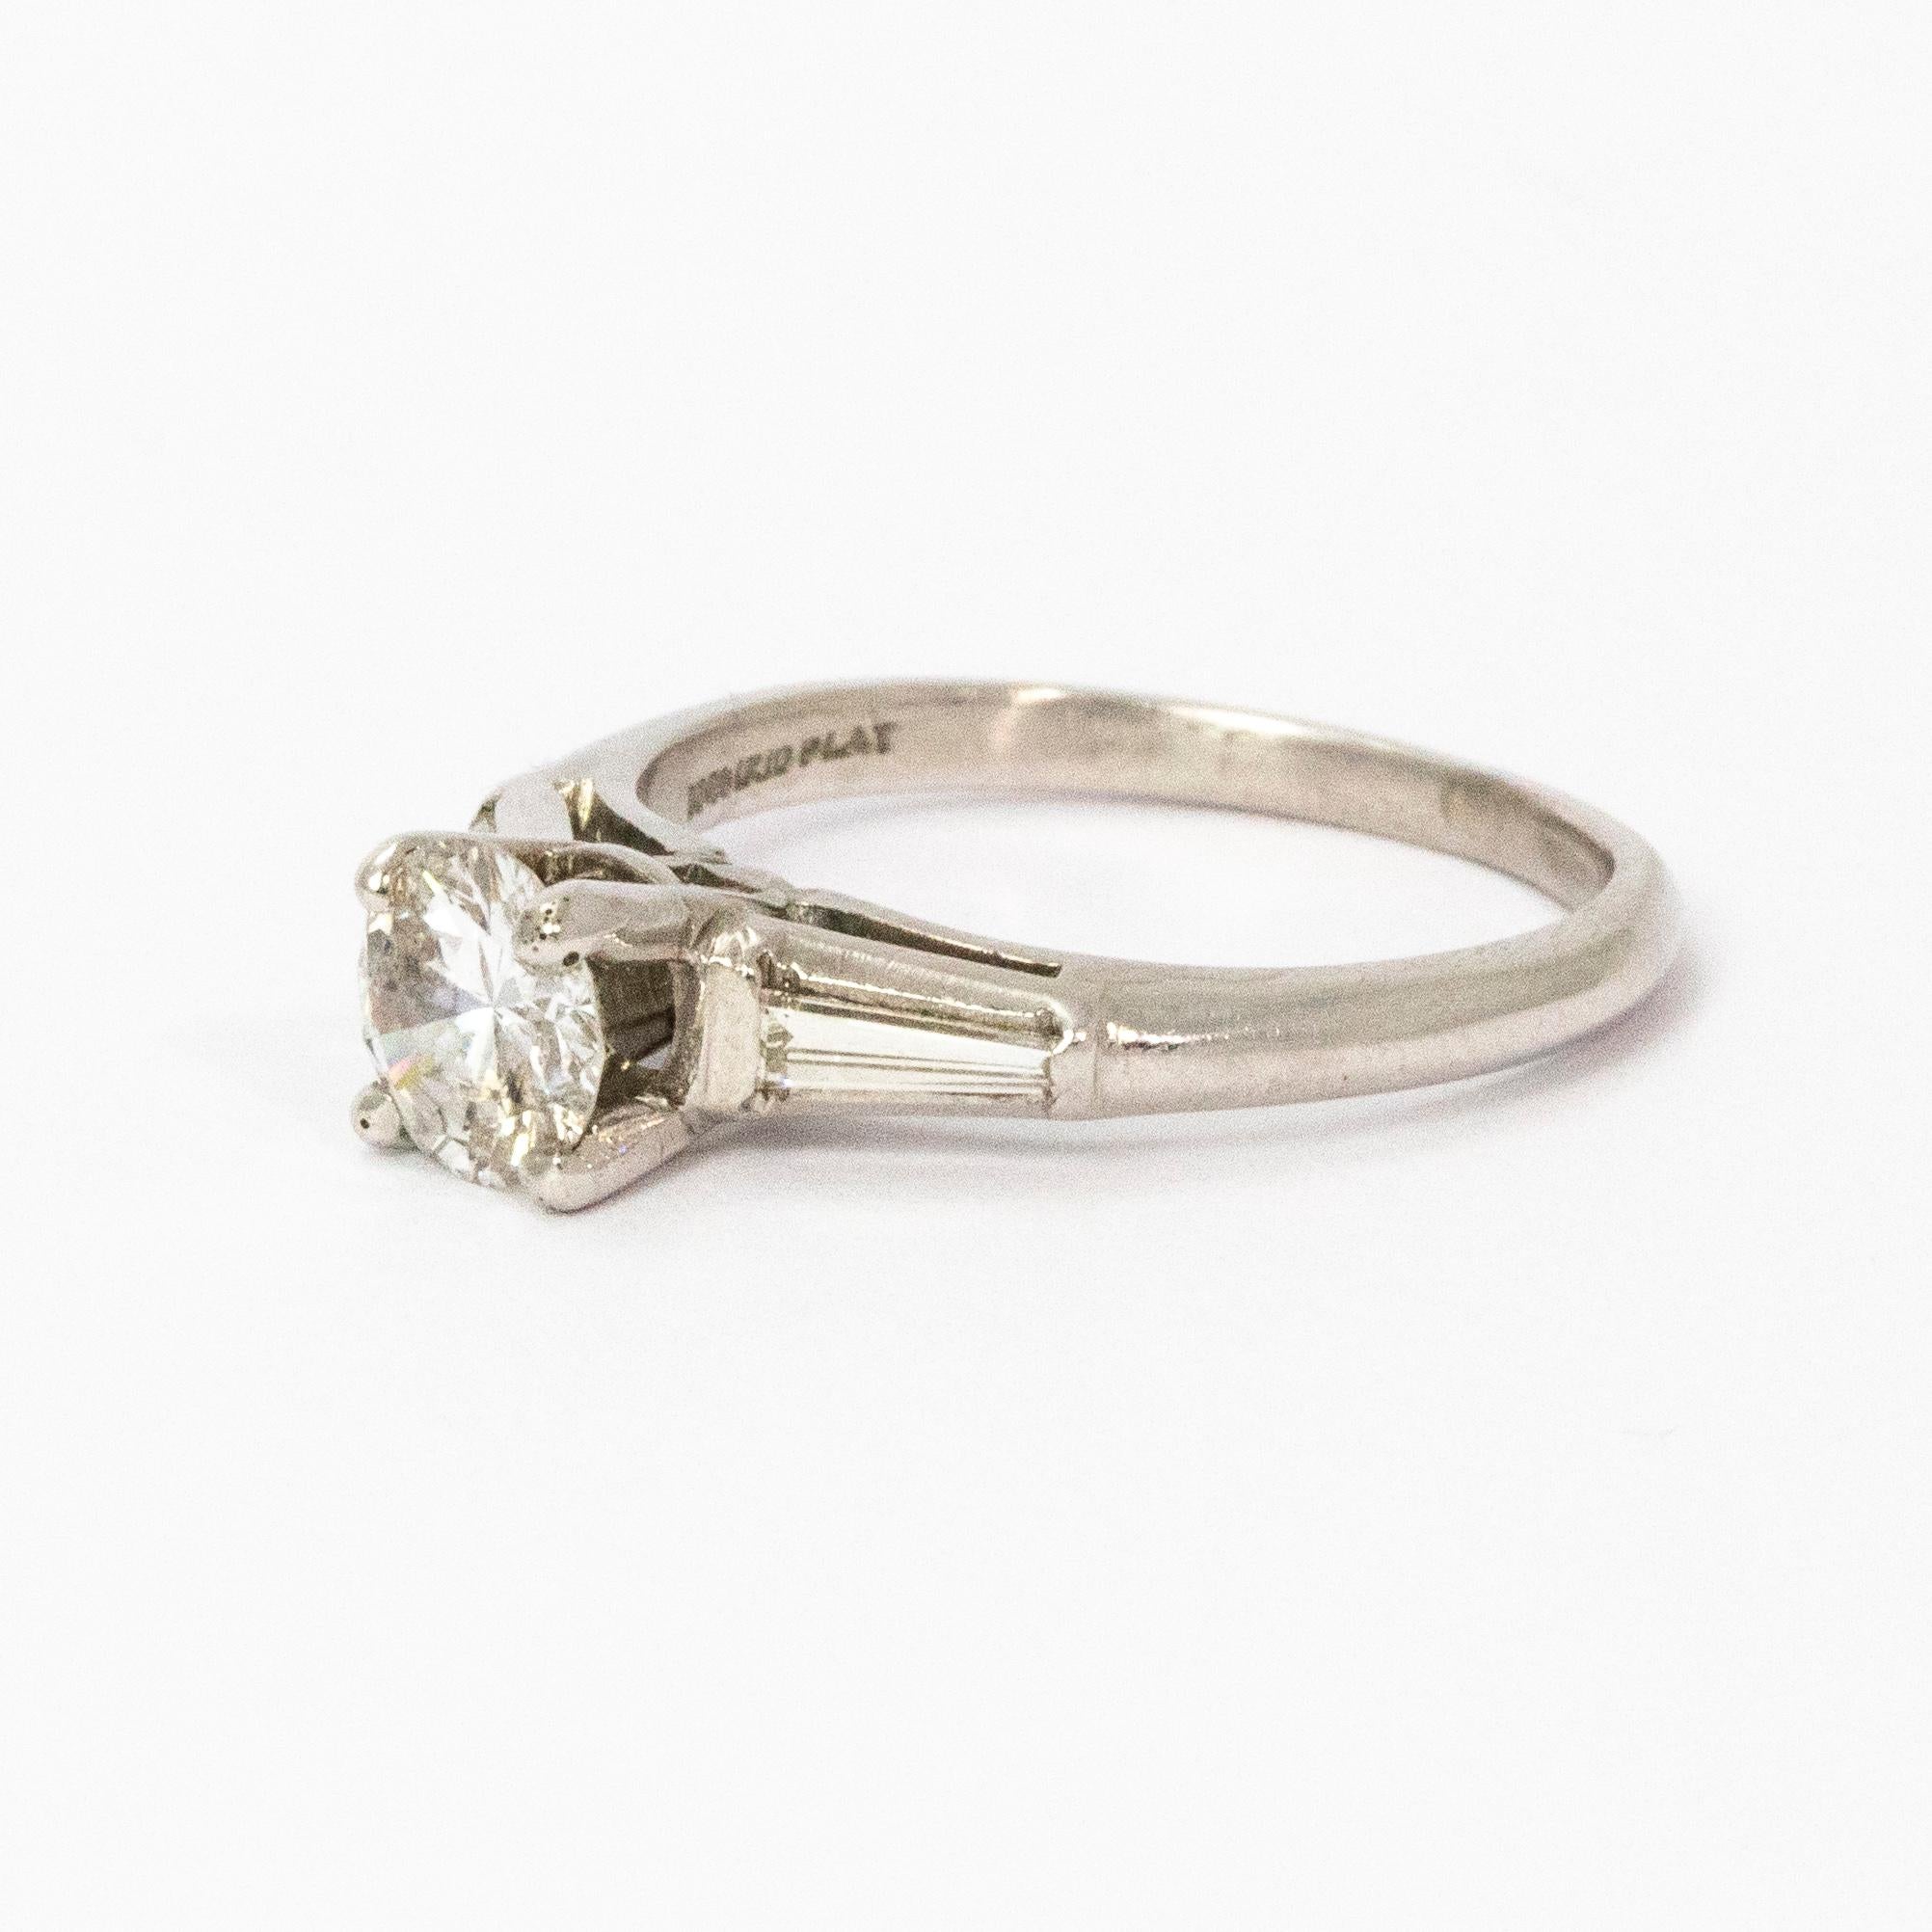 Stunning 1930s Art Deco diamond solitaire. Centre brilliant cut diamond weighing 1.35 carats, F colour and SI-2 clarity, and features tapered baguette diamond shoulders set in 18 karat white gold.

Ring Size: M or 6 1/2